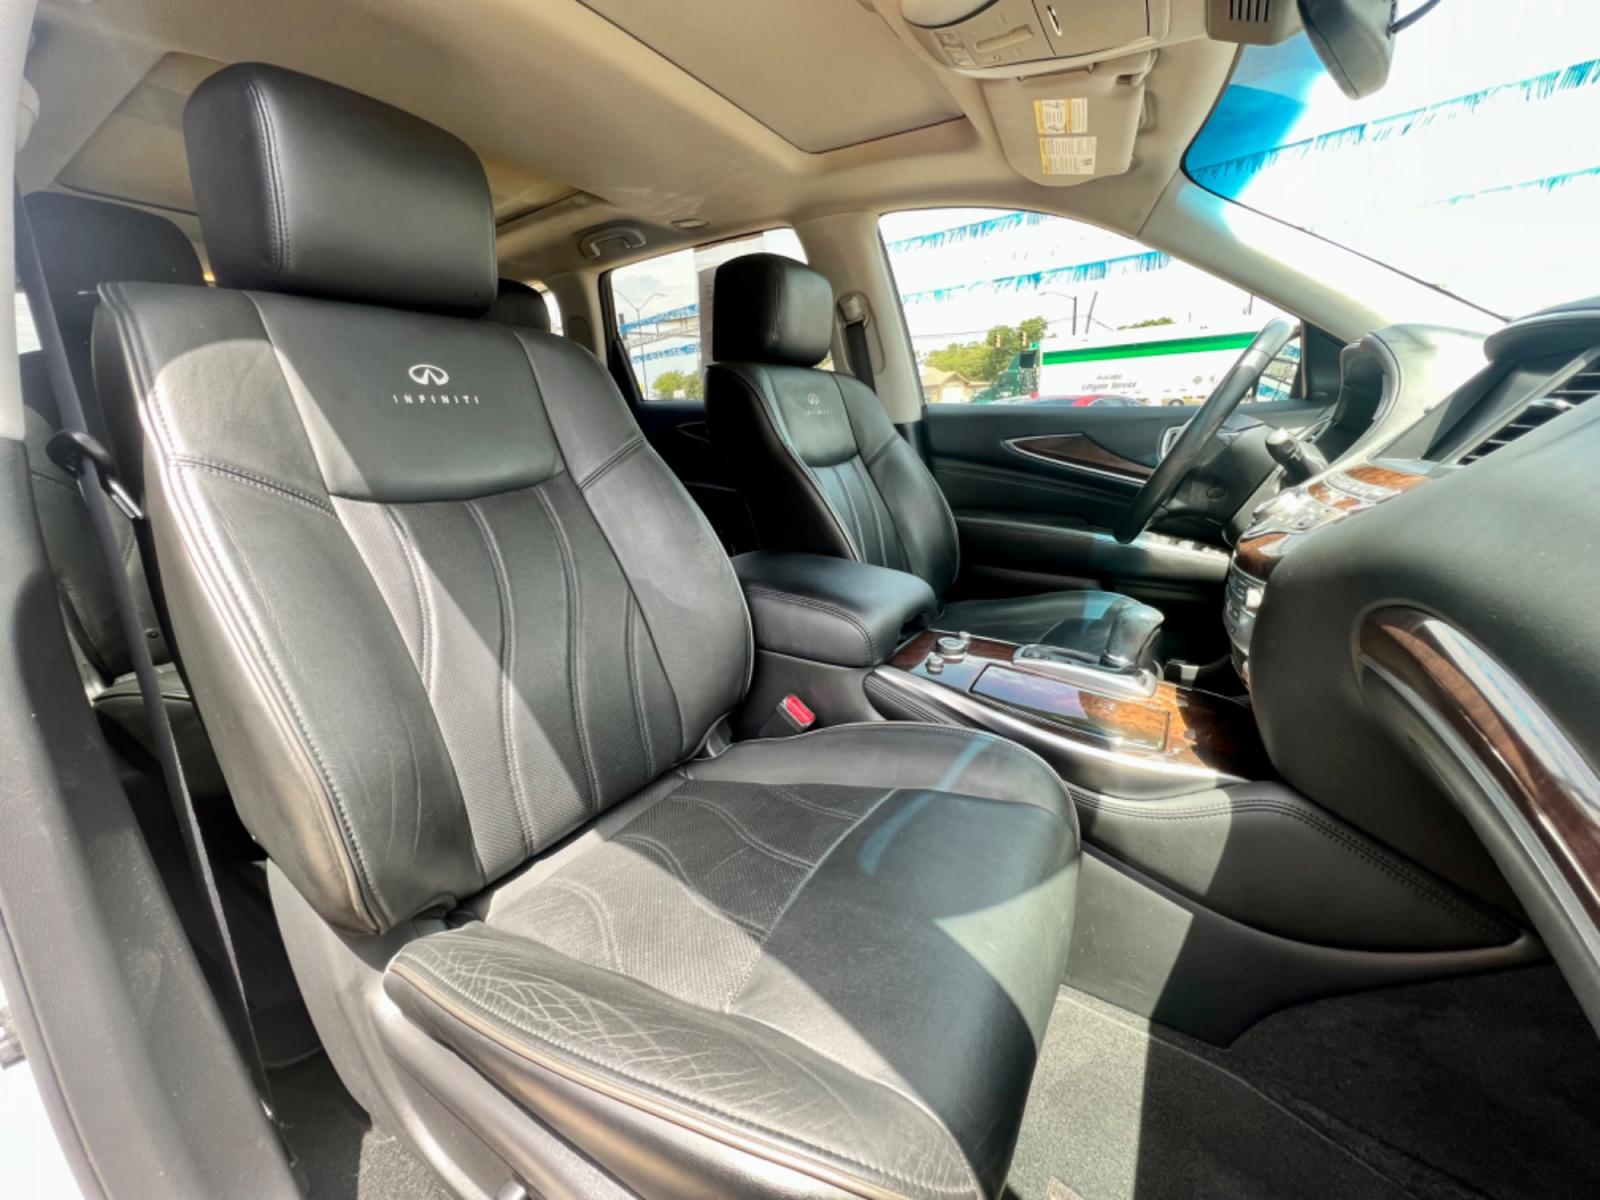 2013 SILVER INFINITI JX35 (5N1AL0MM3DC) , located at 5900 E. Lancaster Ave., Fort Worth, TX, 76112, (817) 457-5456, 0.000000, 0.000000 - This is a 2013 INFINITI JX35 4 DOOR SUV that is in excellent condition. There are no dents or scratches. The interior is clean with no rips or tears or stains. All power windows, door locks and seats. Ice cold AC for those hot Texas summer days. It is equipped with a CD player, AM/FM radio, AUX port - Photo #17